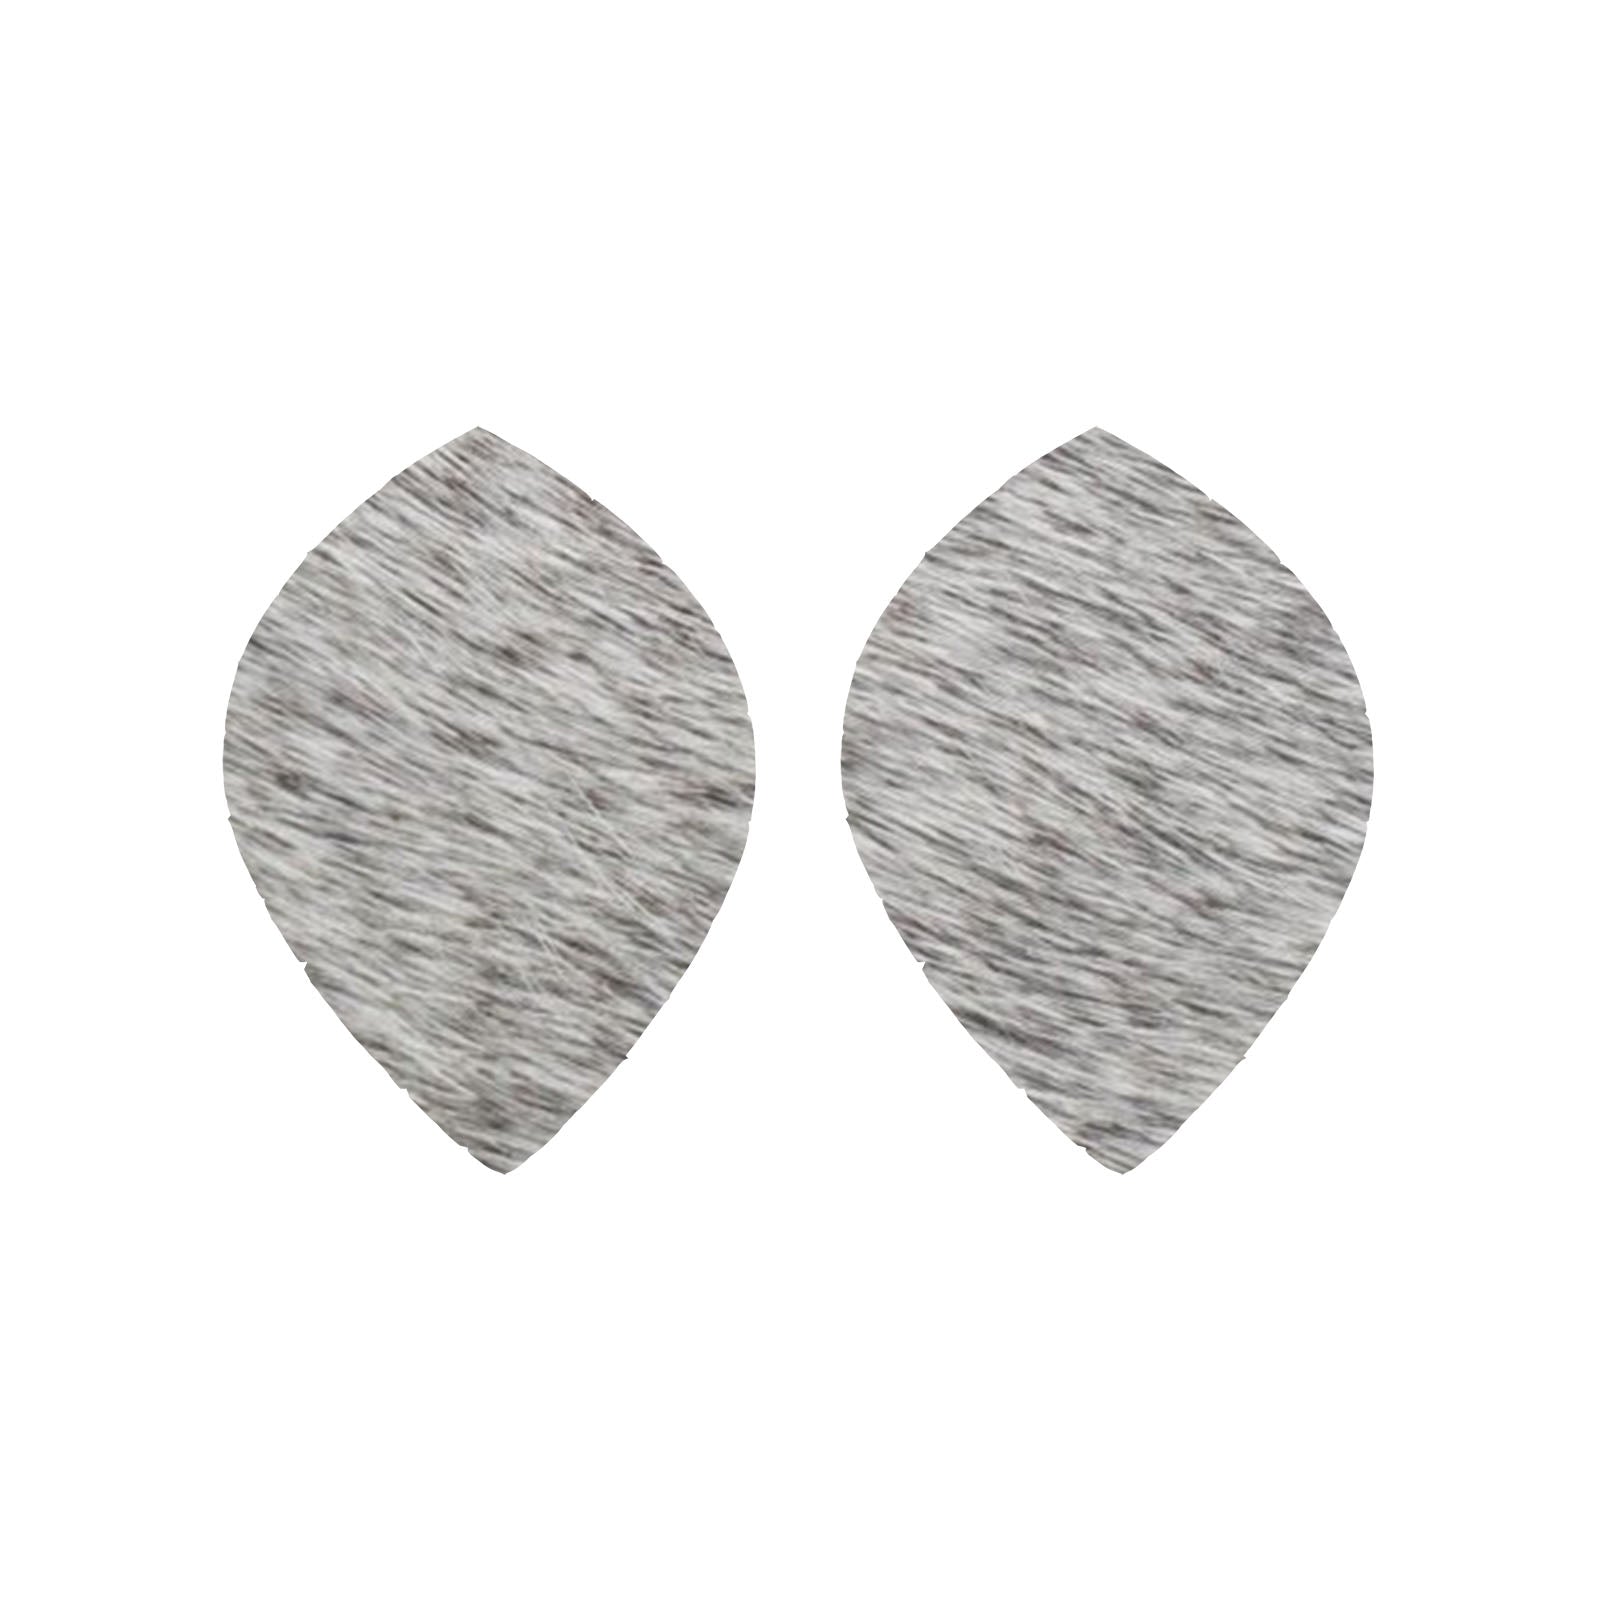 Peppered Light to Medium Grey Hair On Die Cut Earrings, Large Leaf | The Leather Guy